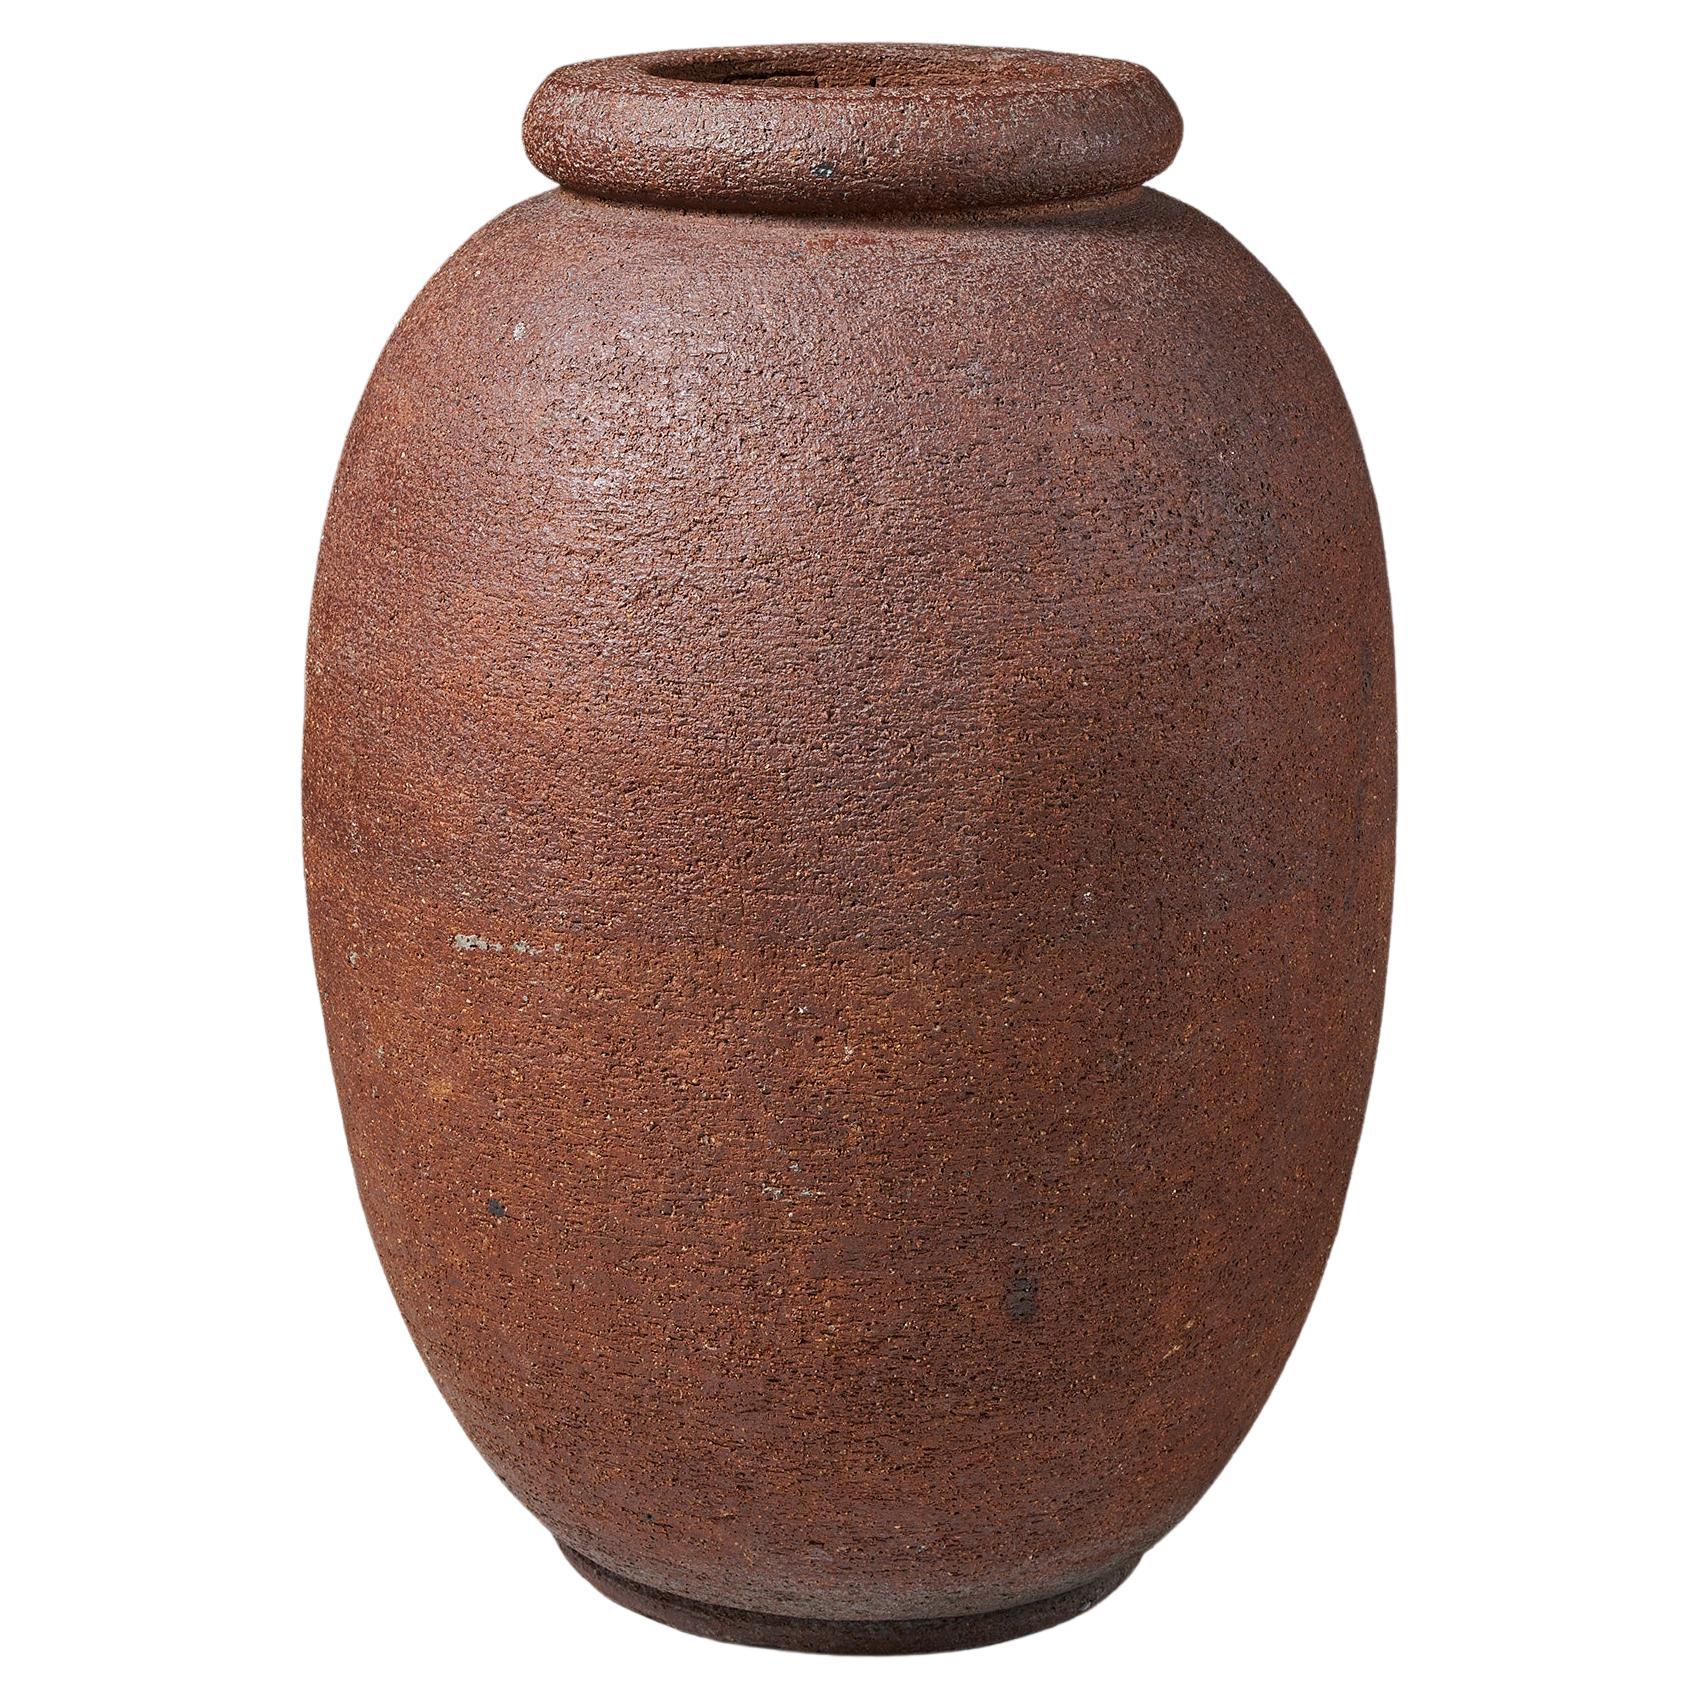 Urn designed by Gunnar Nylund for Rörstrand,
Sweden, 1936.

Stoneware.

Signed.

Dimensions:
H: 78.5 cm / 2' 7''
D: 53 cm / 21''

Exhibitions: In Paris 1937 at the World's Fair, Gunnar Nylund's garden urns were placed on the terrace outside the